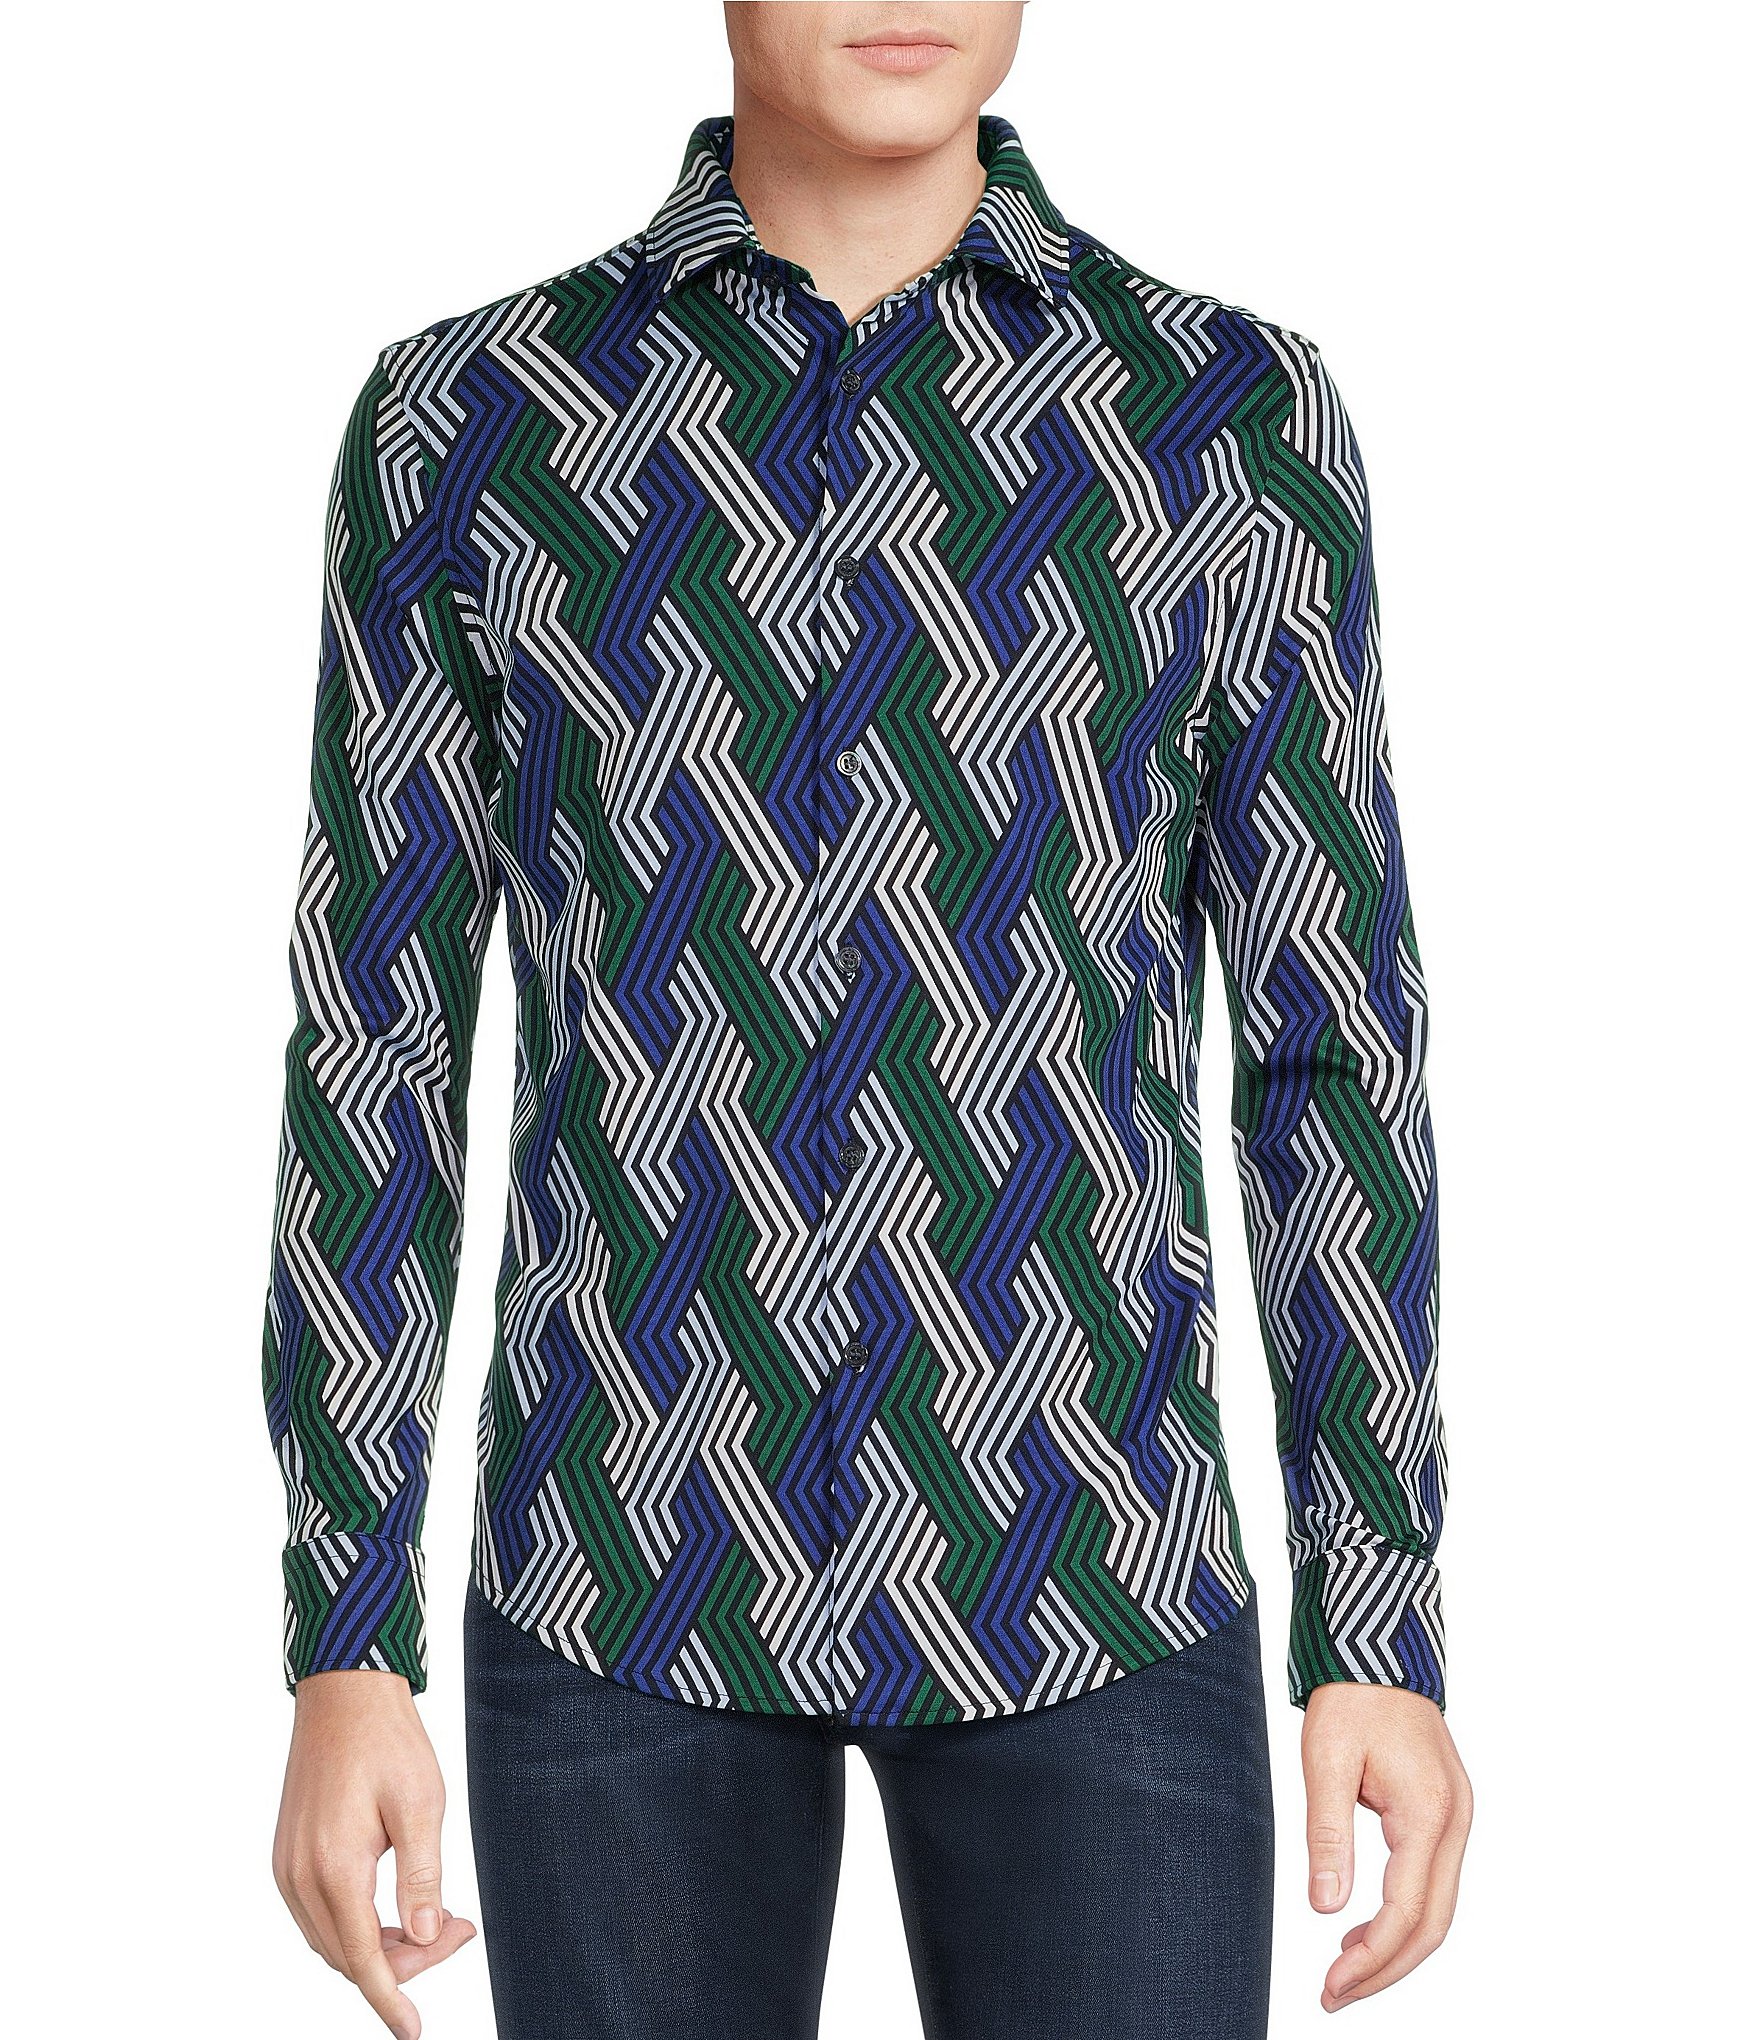 Zigzag Printed to Murano Sleeve Collection | Slim Long Space Back Fit Dillard\'s Shirt Coatfront